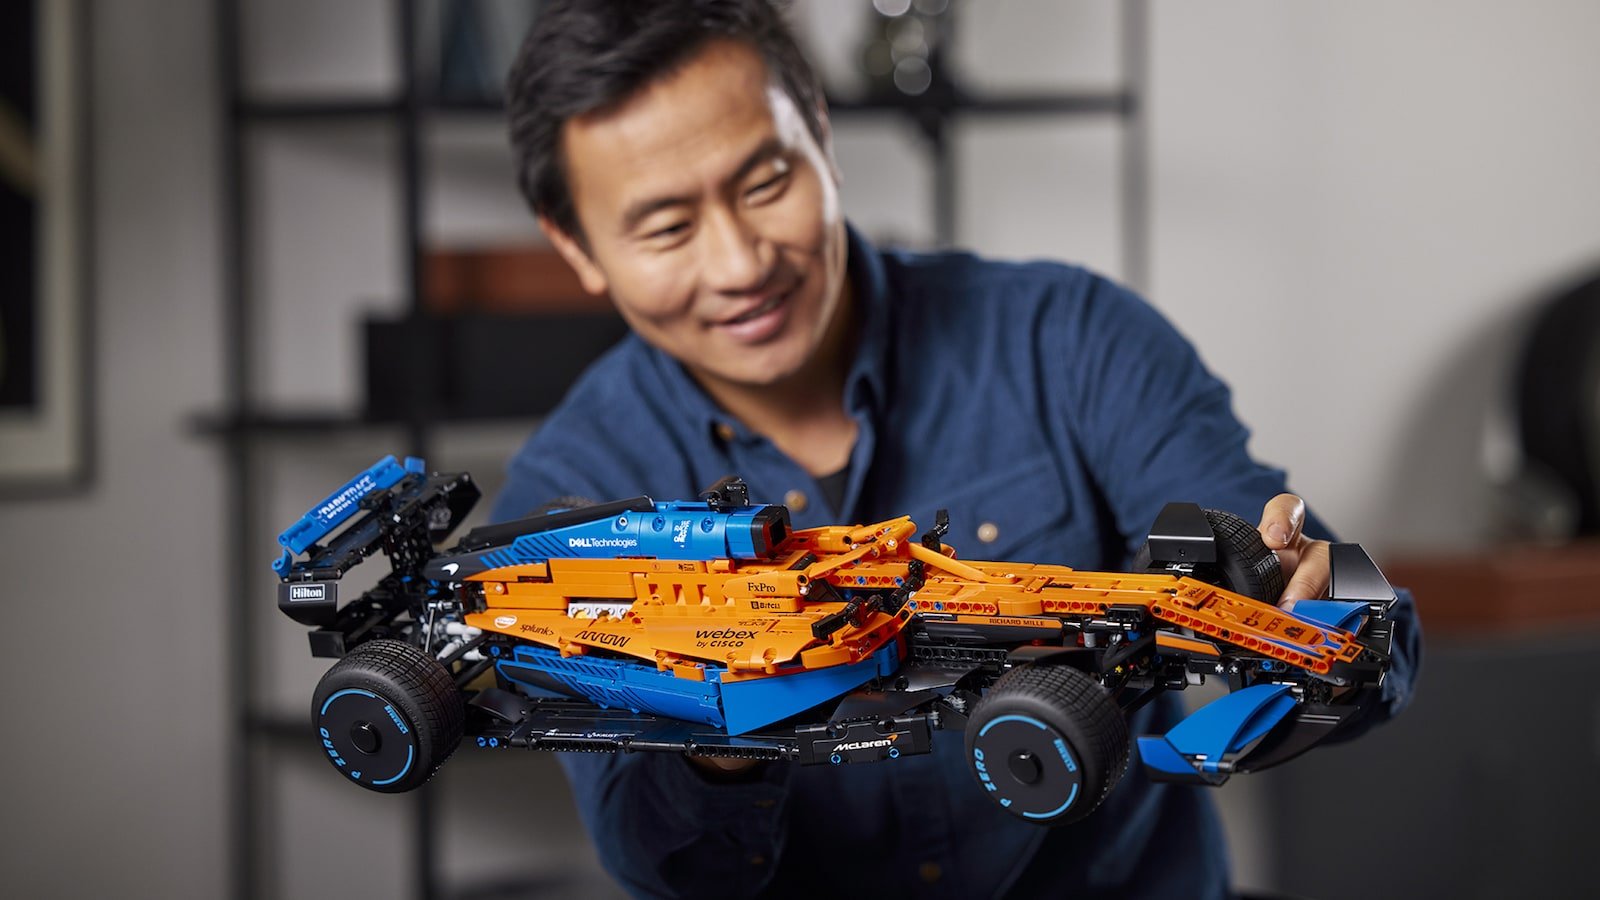 LEGO Technic McLaren Formula 1 Race Car features a V6 cylinder engine with moving pistons